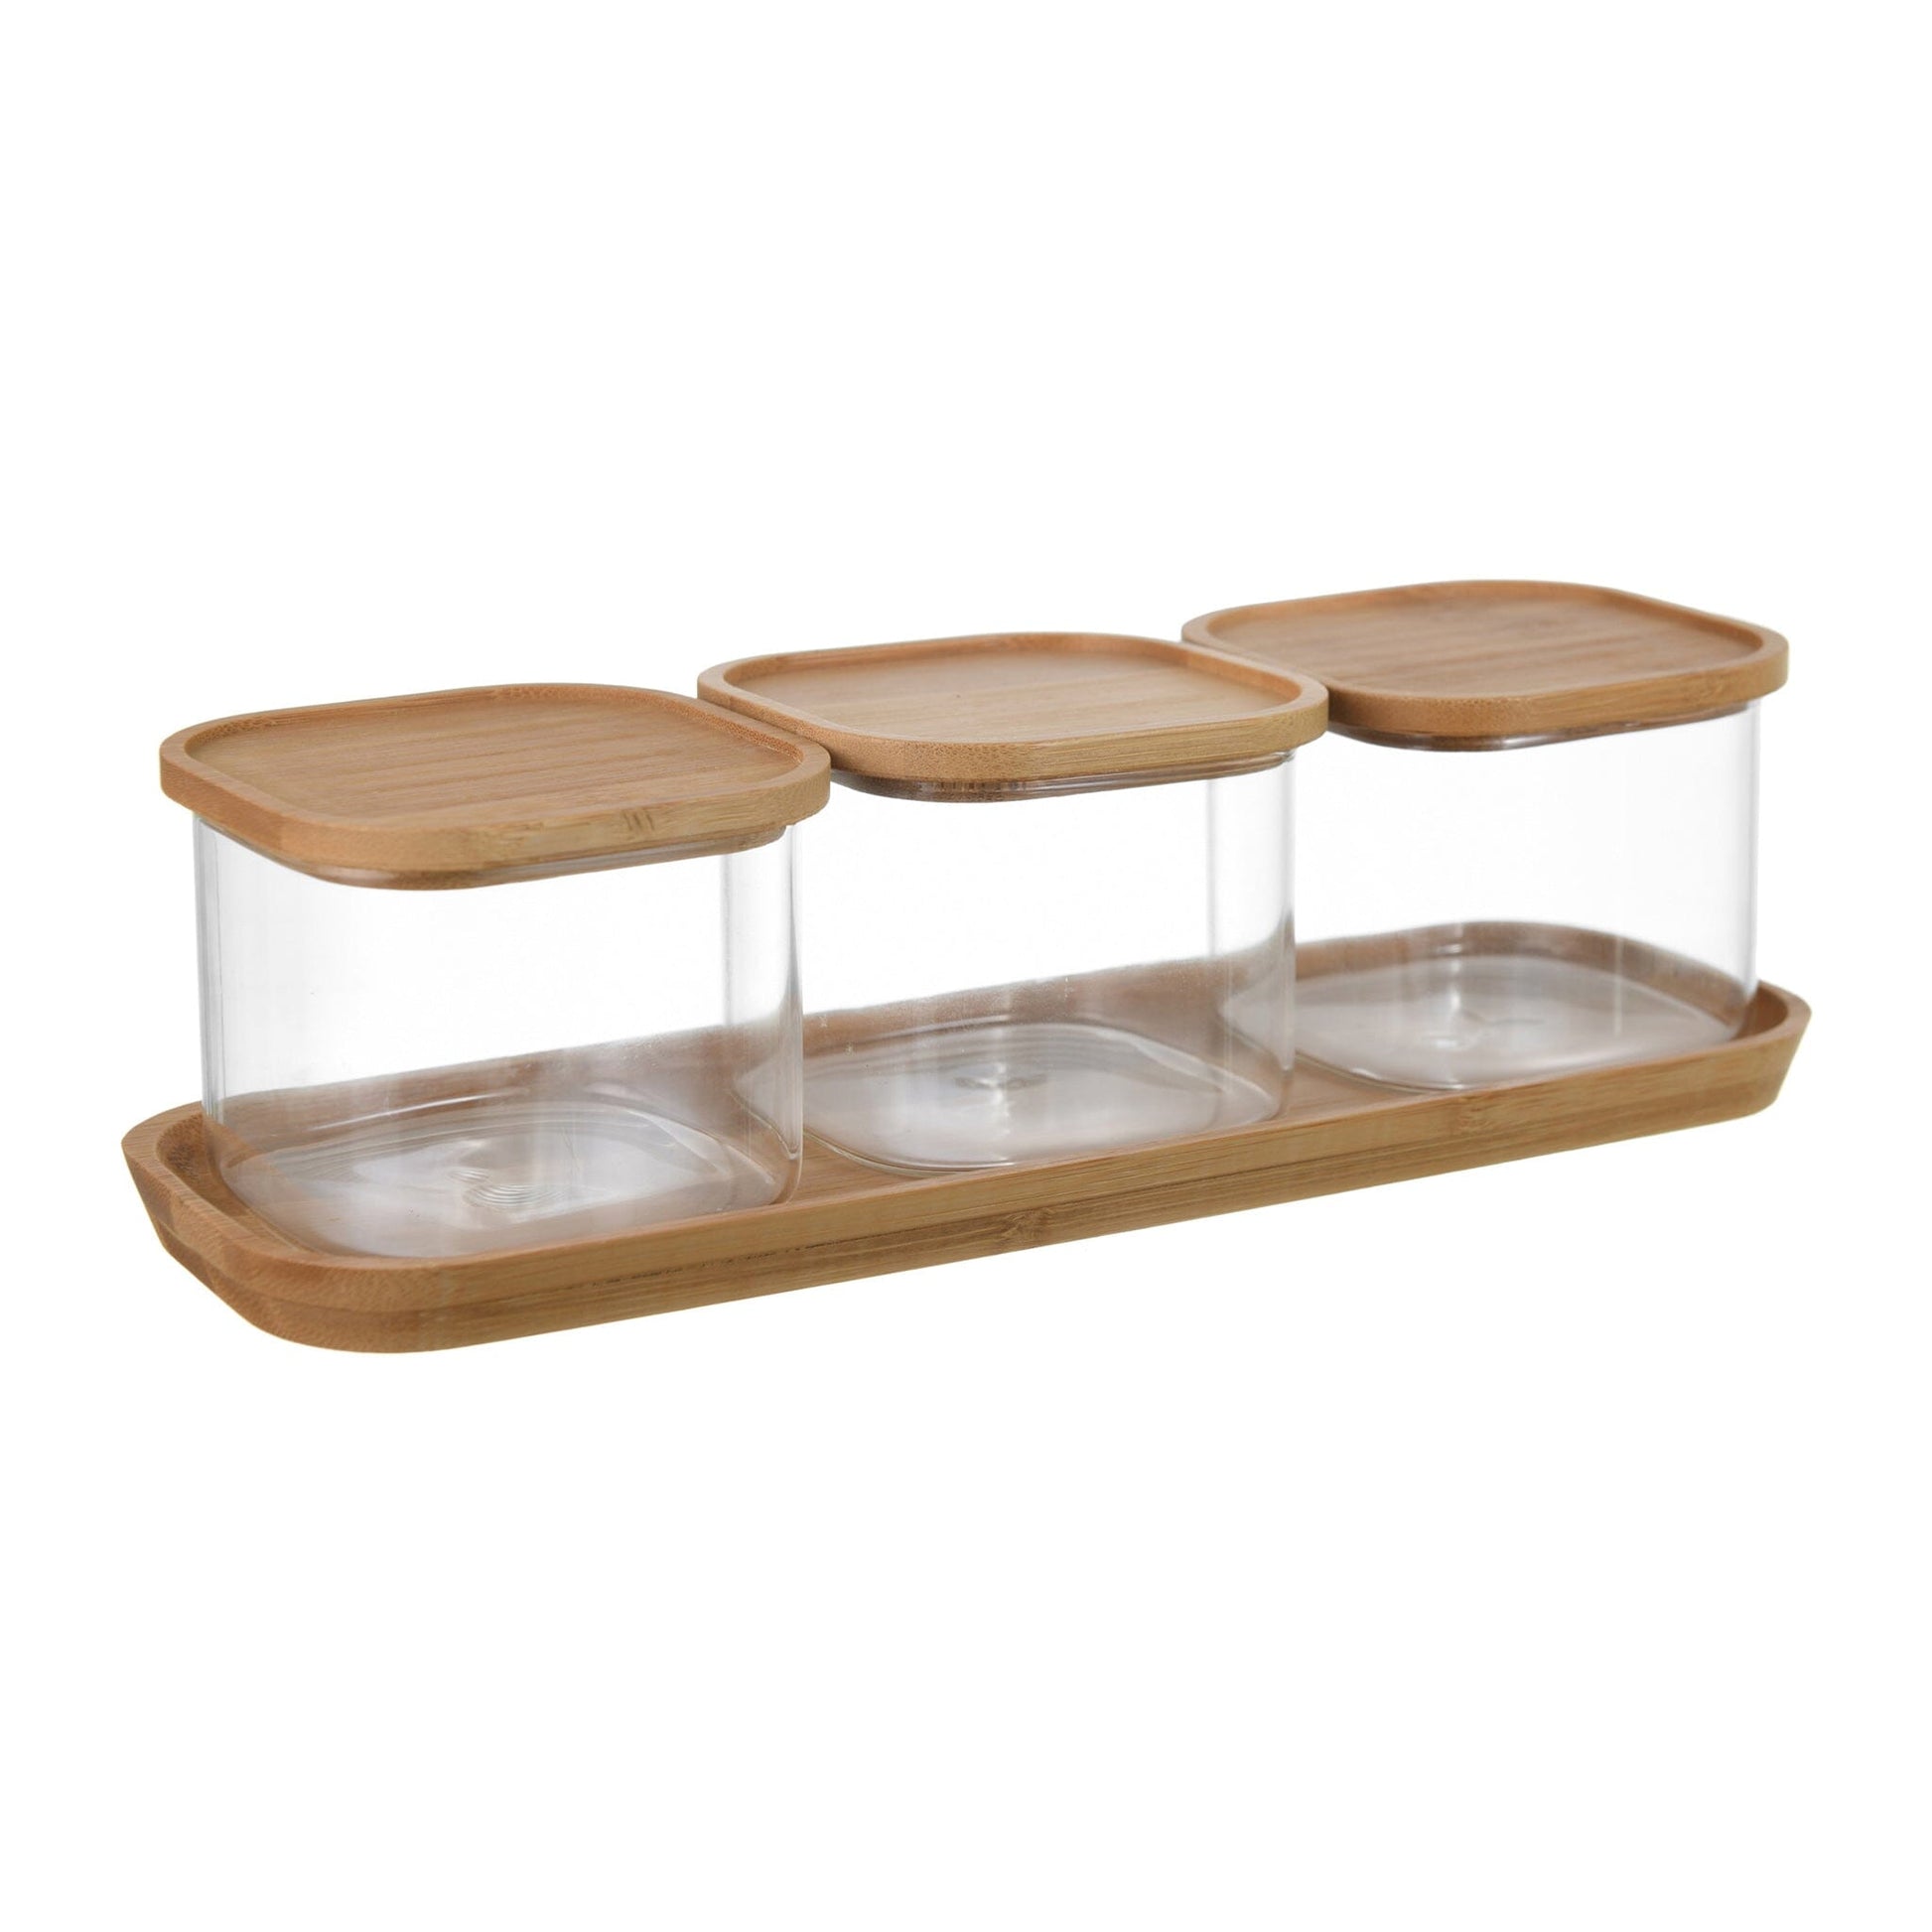 3pcs spice jars with spoon and tray Price N13,000